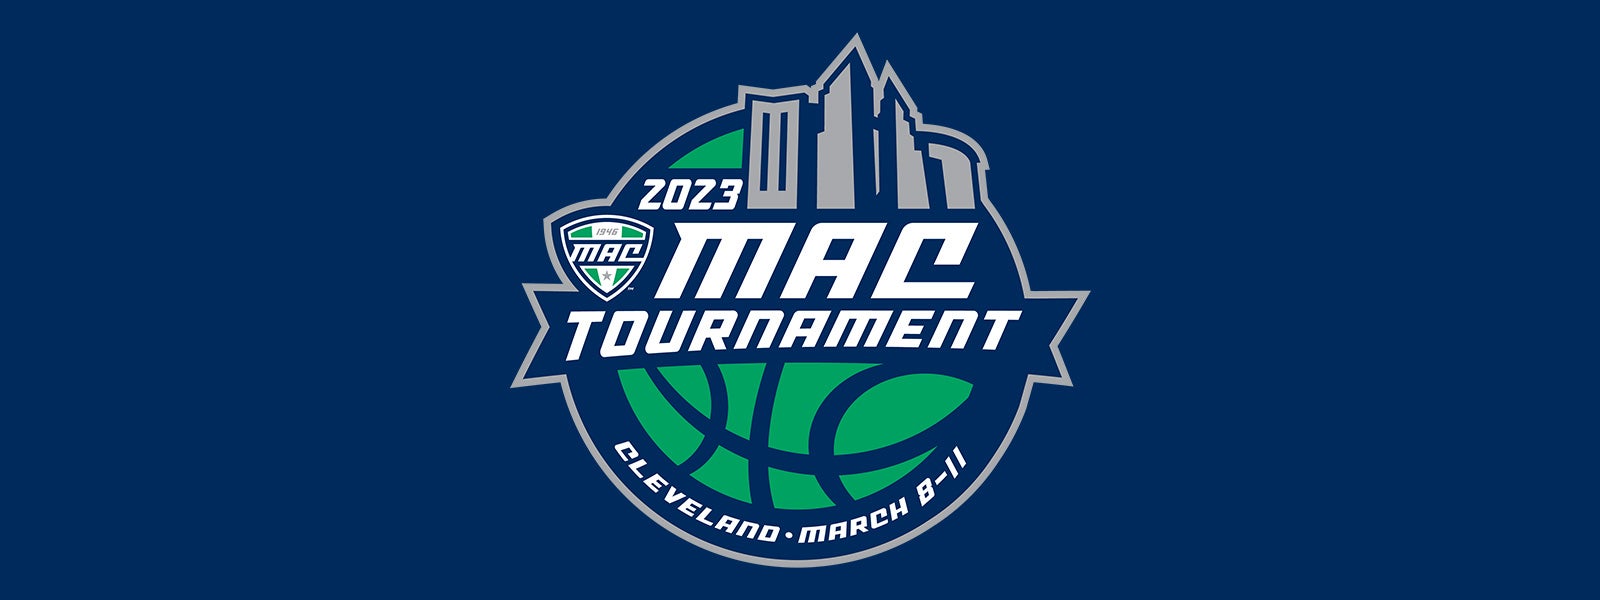 2023 Mid-American Conference Tournament